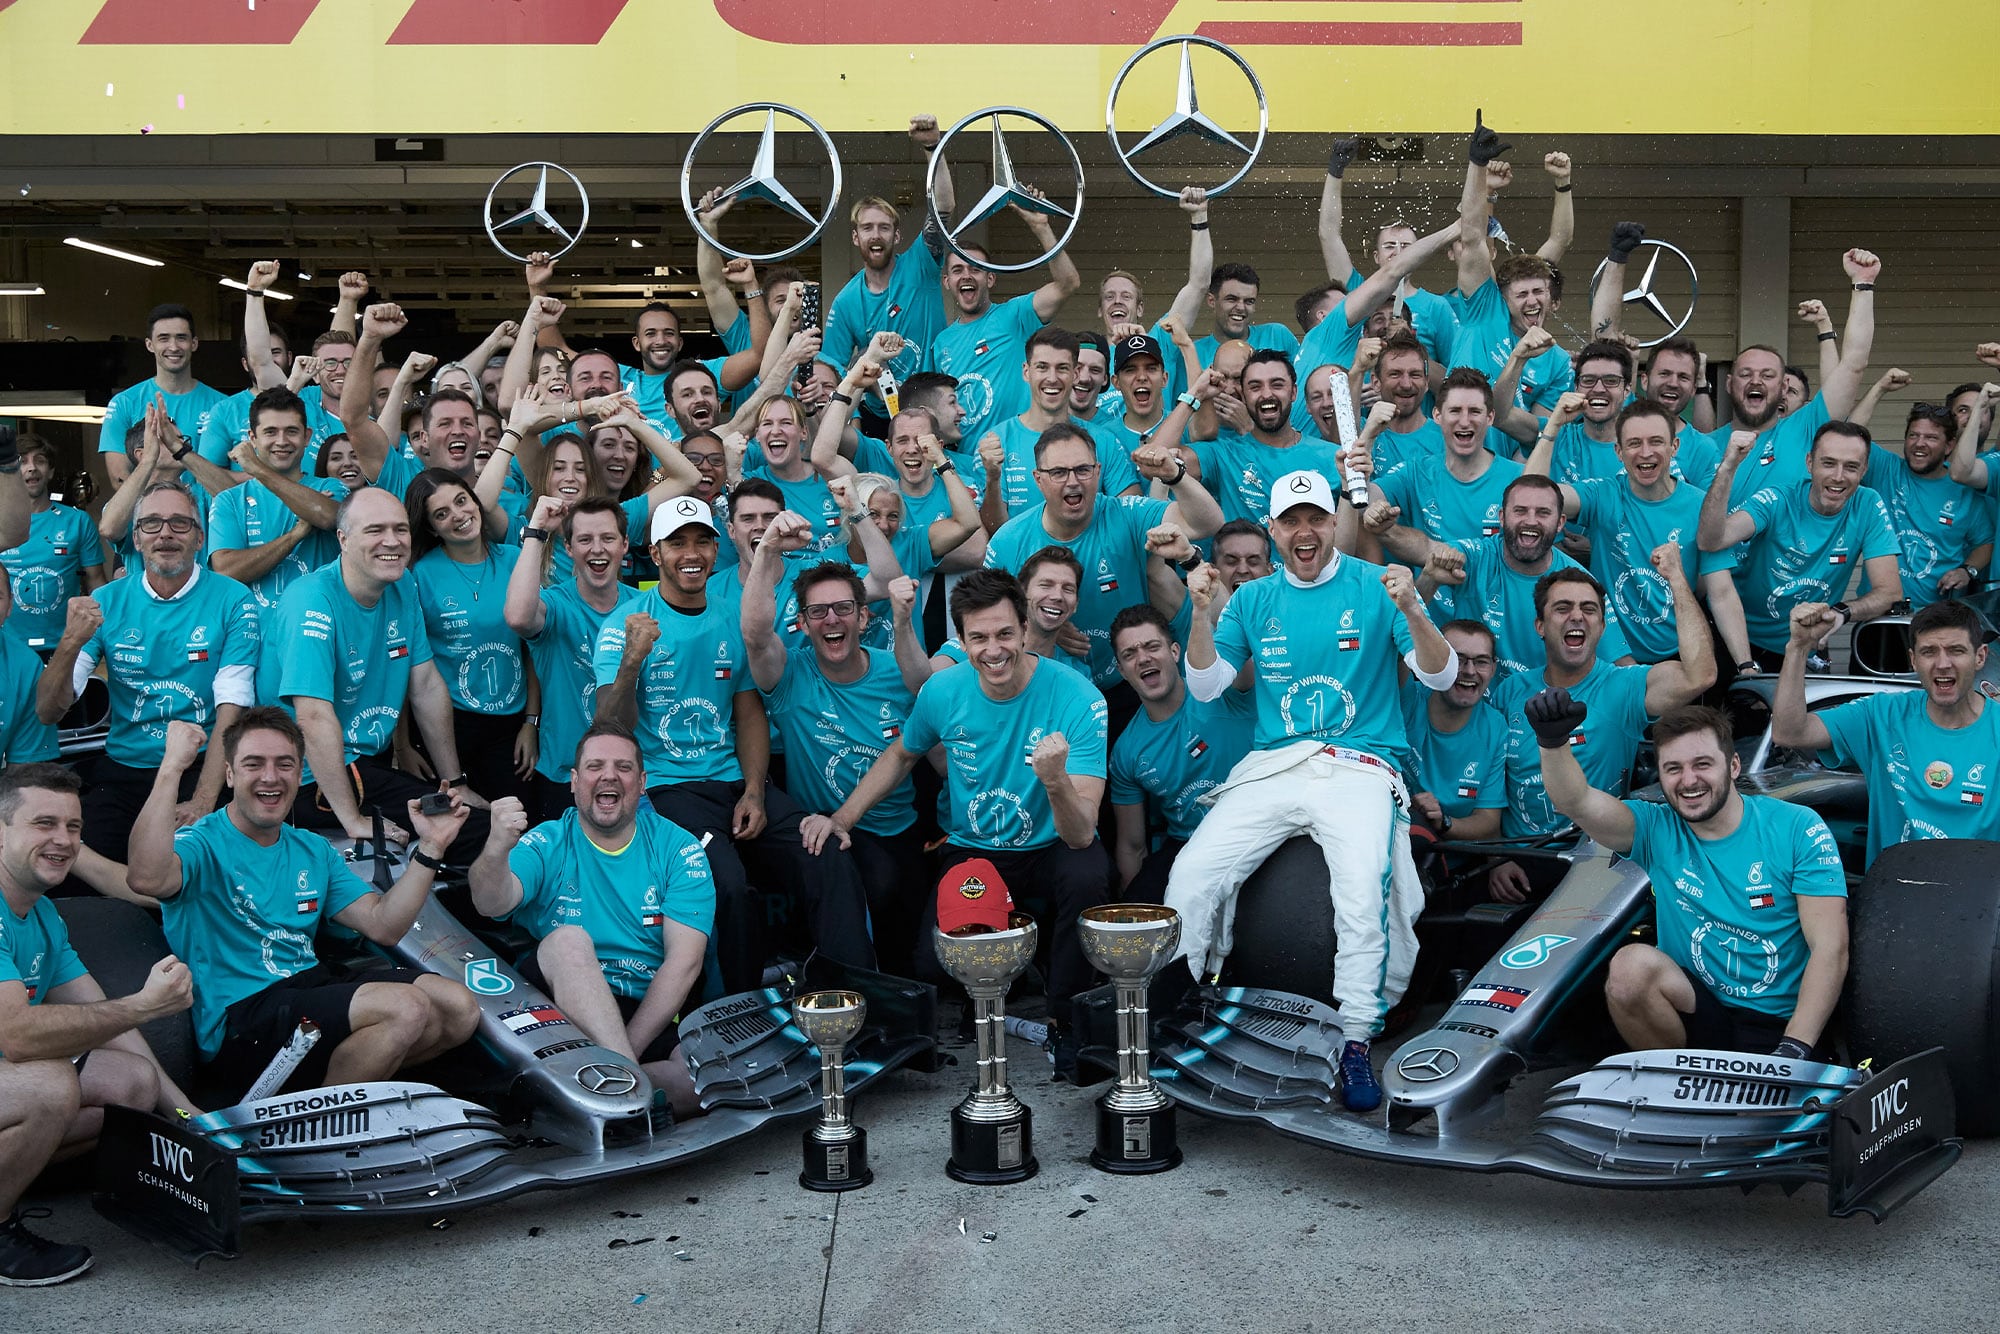 Mercedes celebrates winning its sixth constructors' championship title at the 2019 Japanese Grand Prix